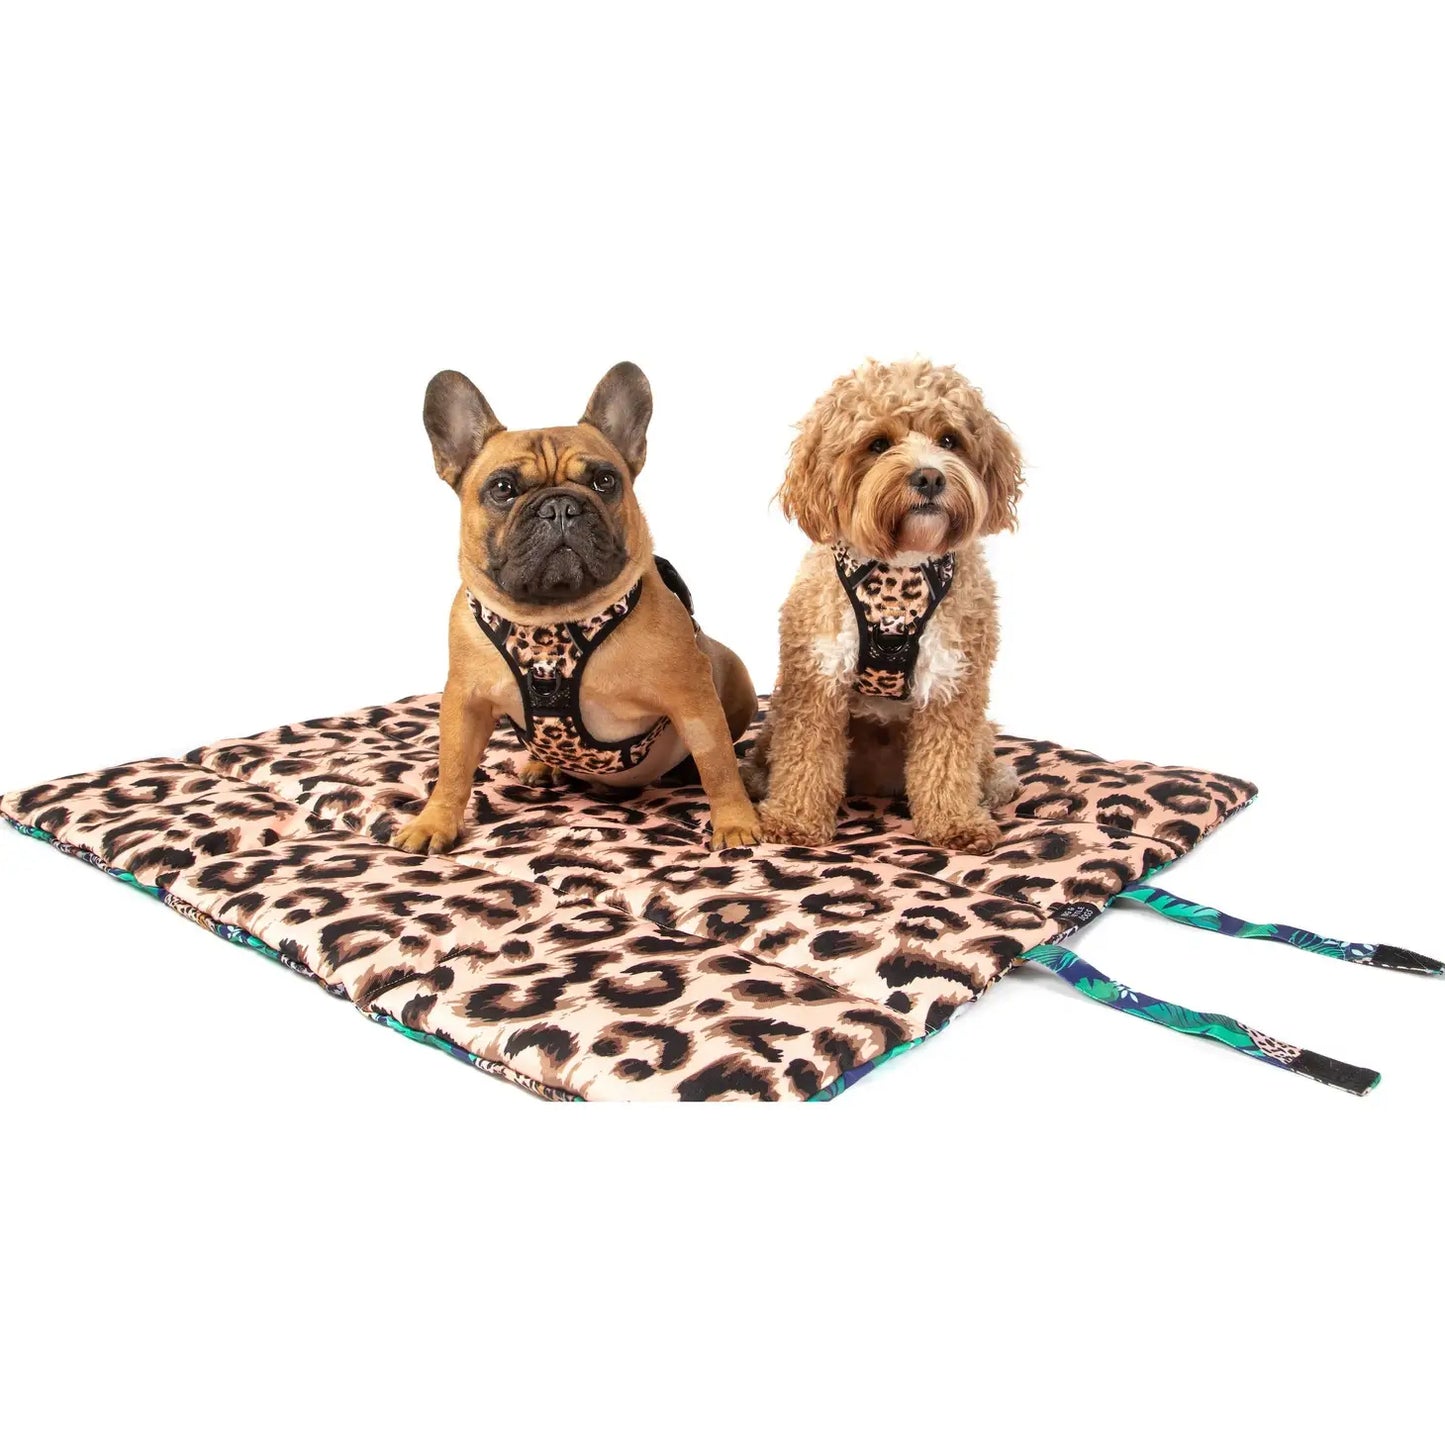 "Big and Little Dogs" ON-THE-GO PET MAT: Luxurious Leopard